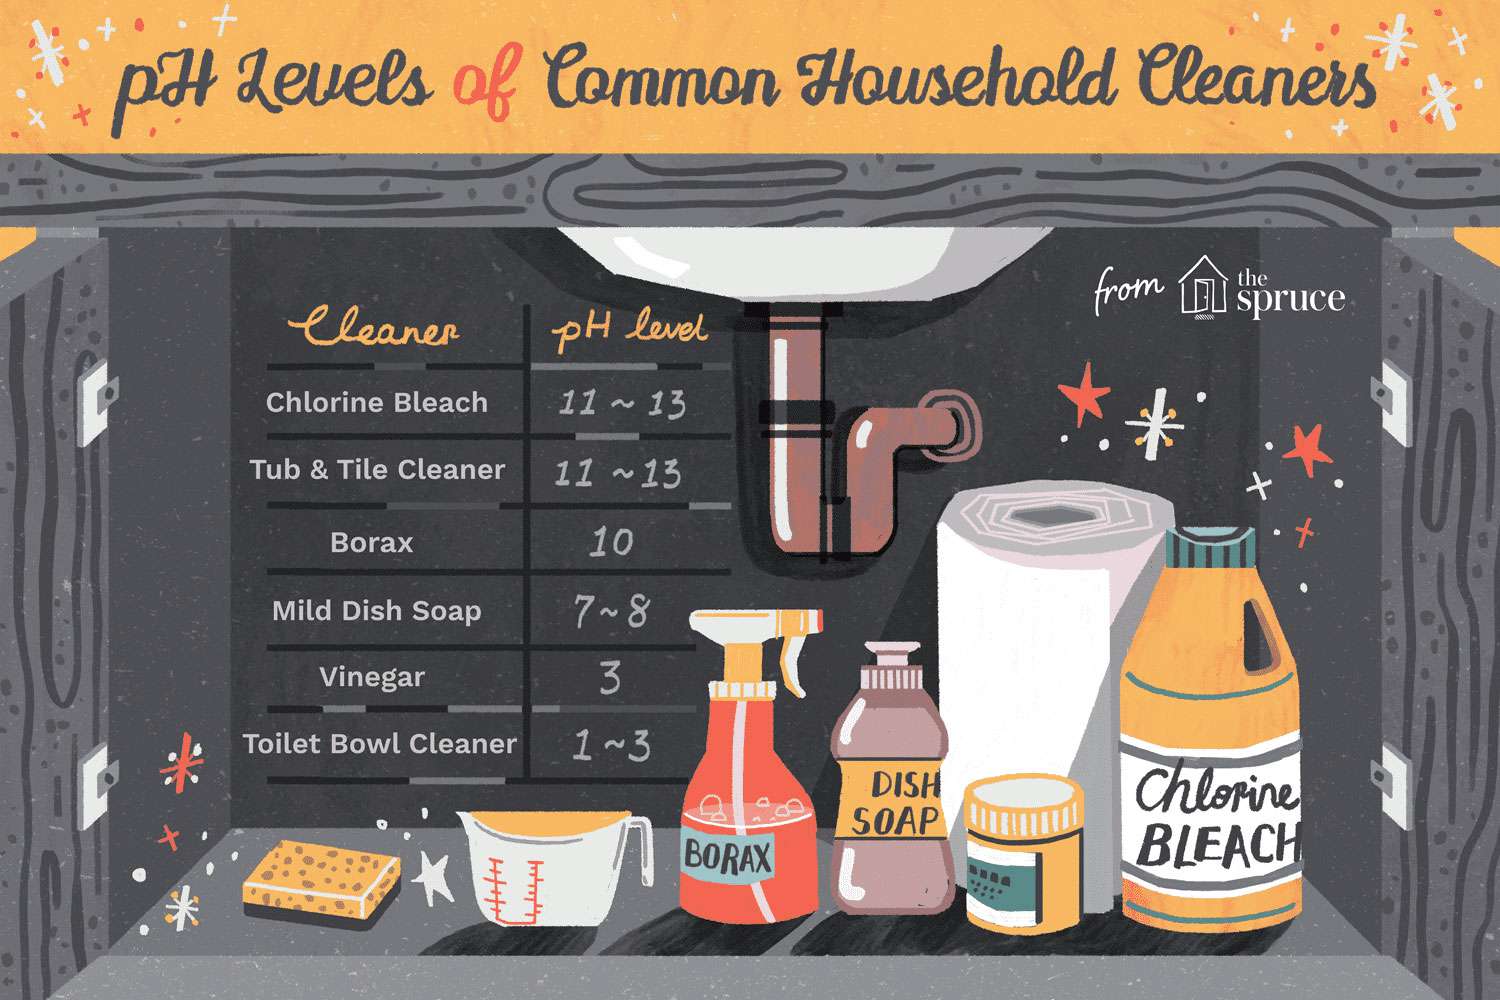 ph levels of common household cleaners